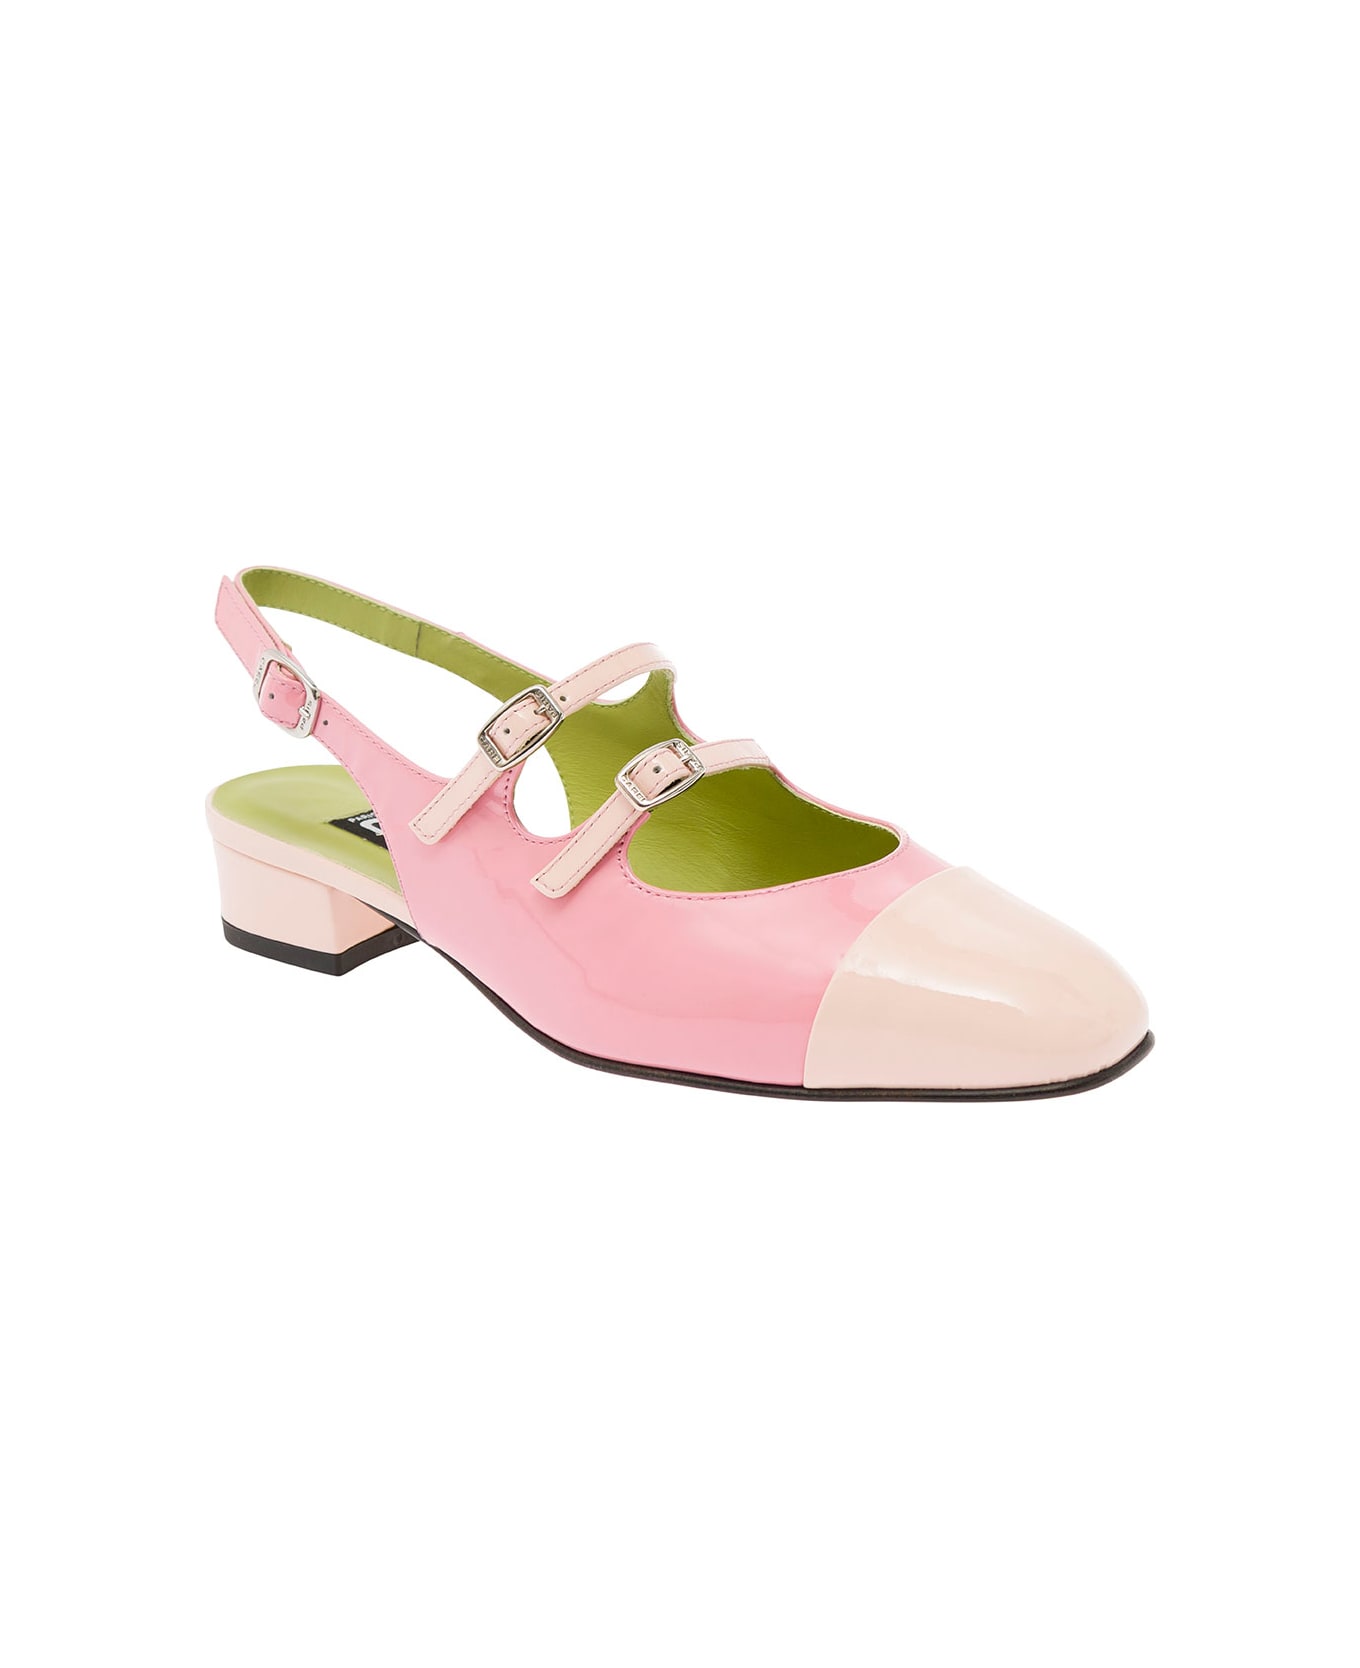 Carel 'abricot' Pink Slingback Mary Janes With Contrasting Toe In Leather Woman - Pink